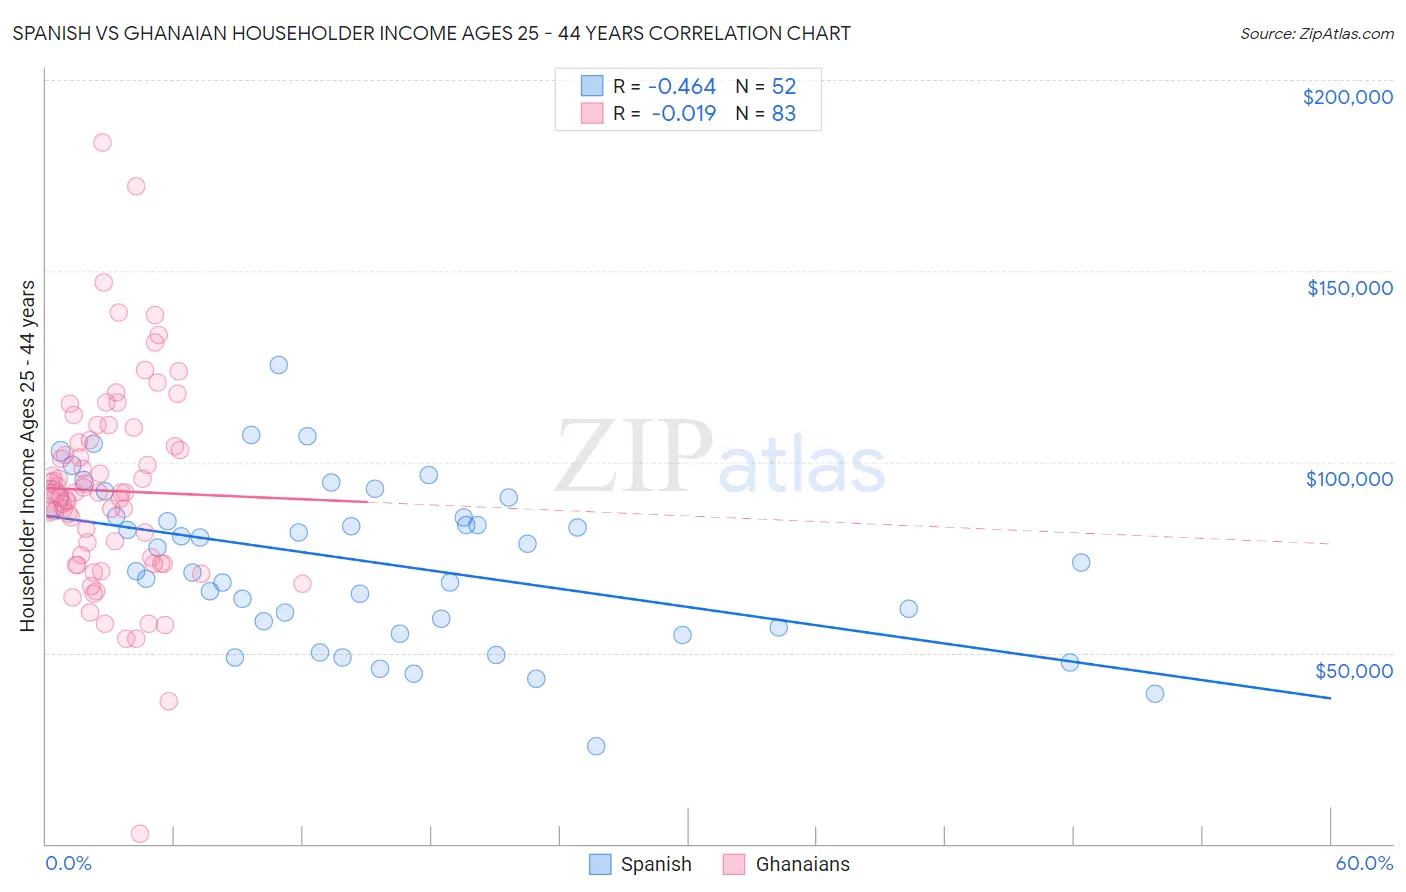 Spanish vs Ghanaian Householder Income Ages 25 - 44 years